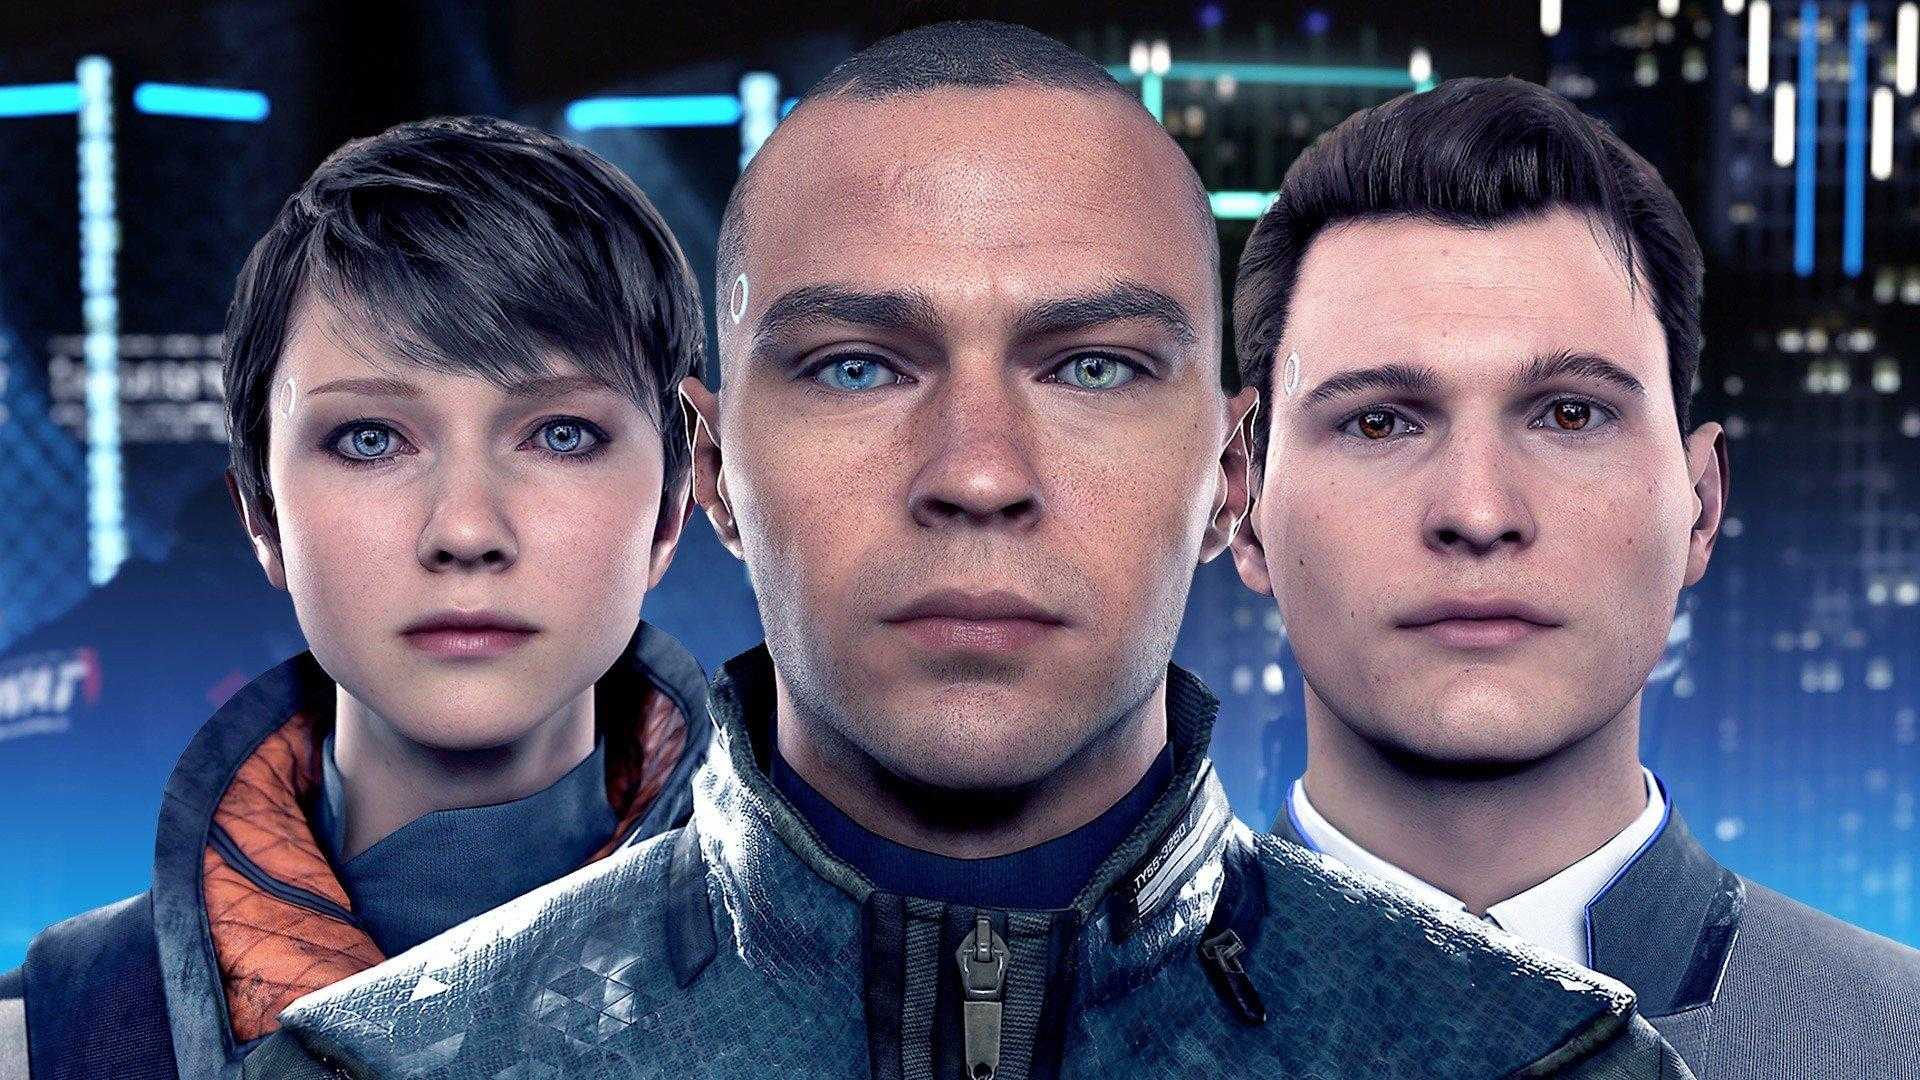 Best 14 interactive games like detroit: become human